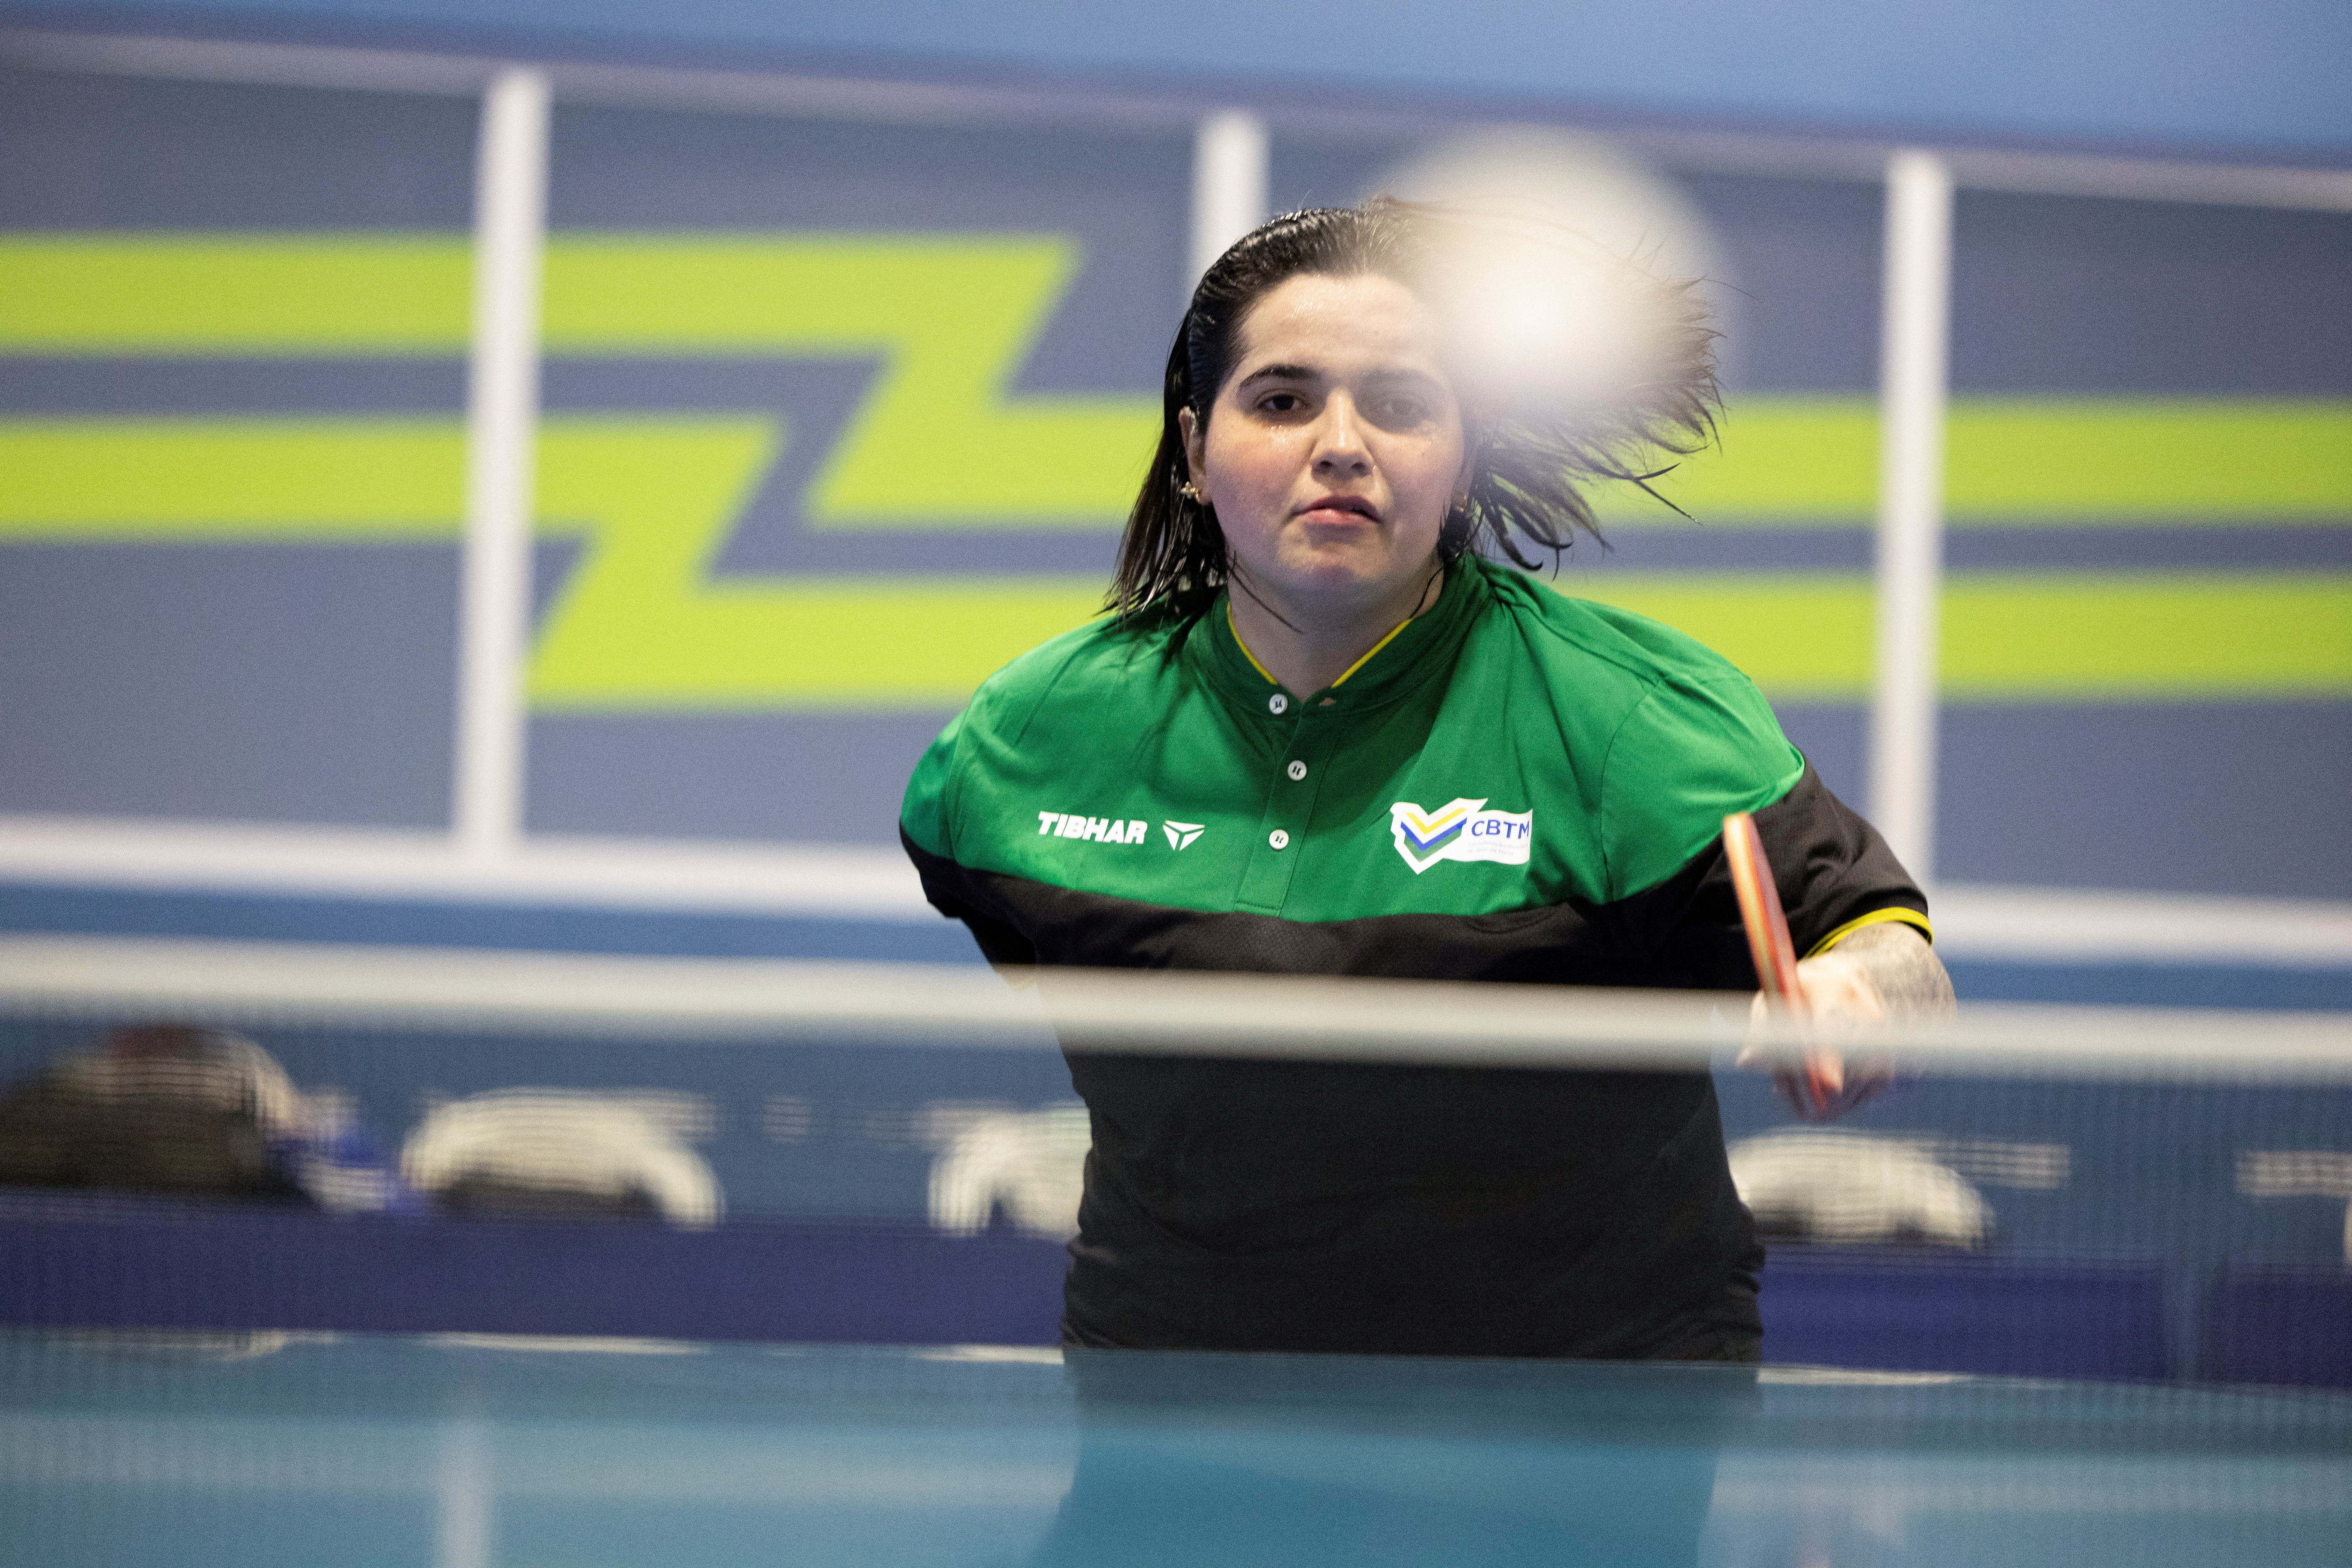 Brazilian to be the first woman to compete in the Olympics and Paralympics